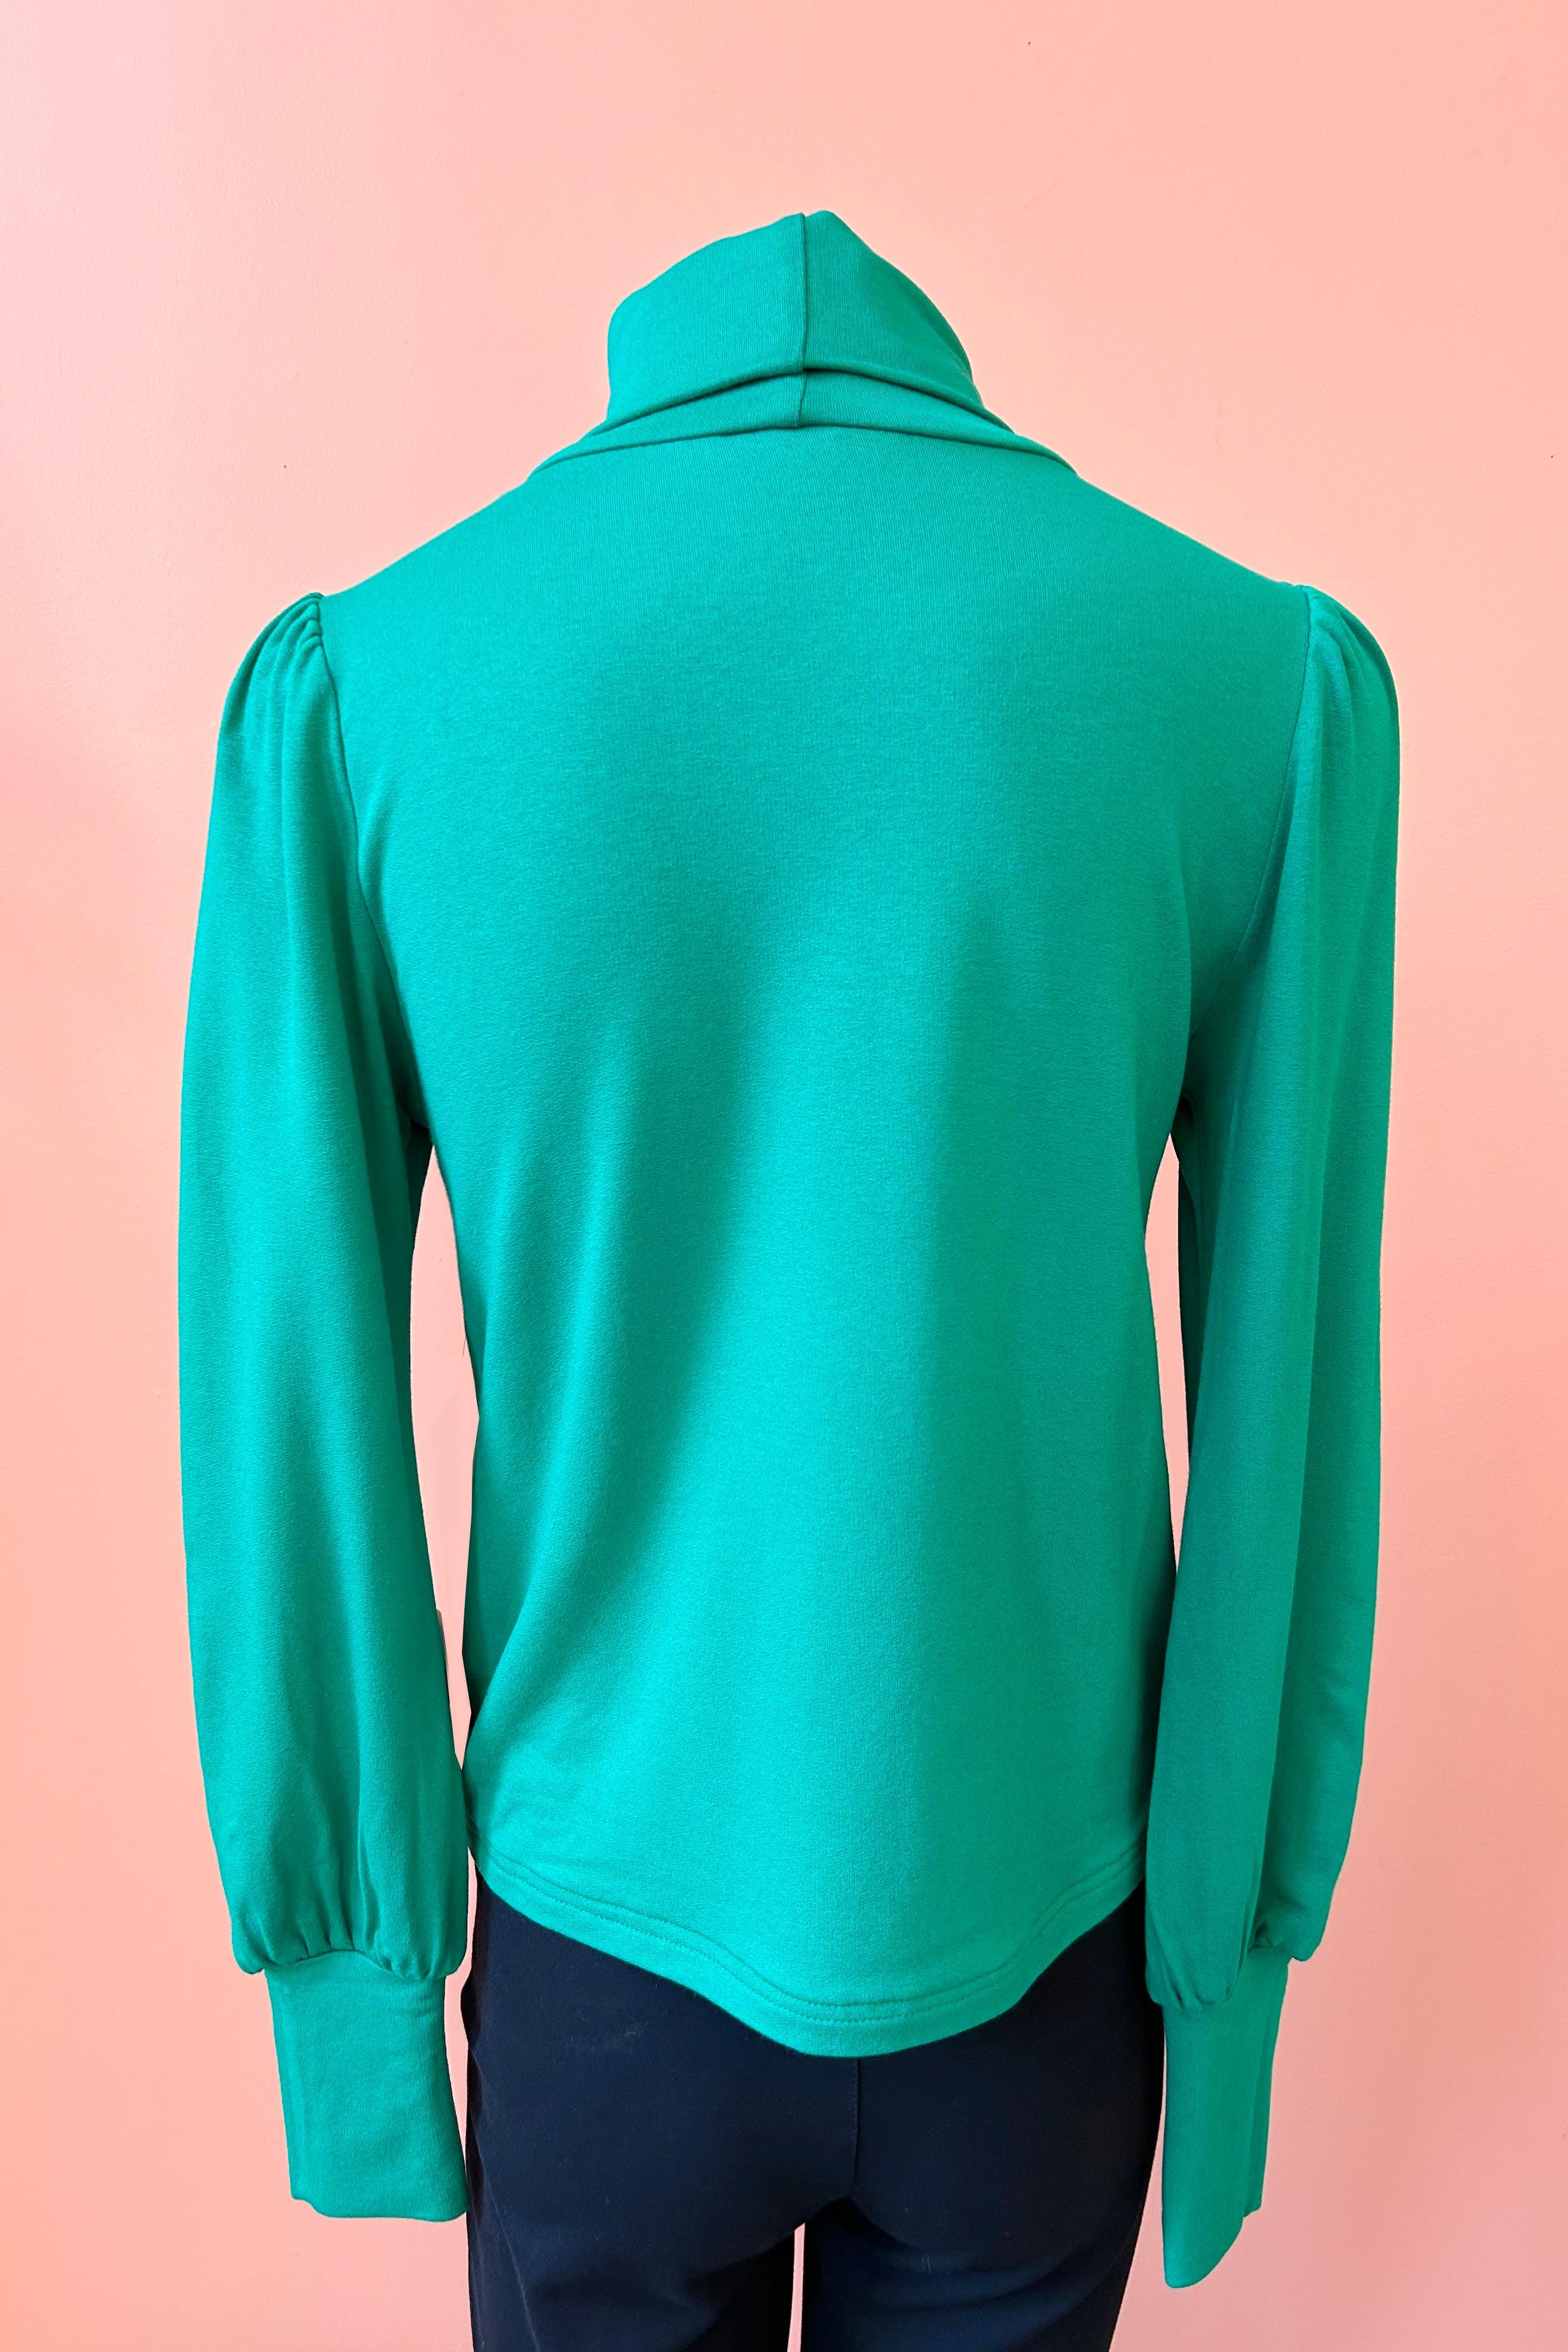 Turtleneck Top by Misstery, Green, back view, high neck, puffed sleeves with gathered cuffs, sizes S to XL, made in Toronto 